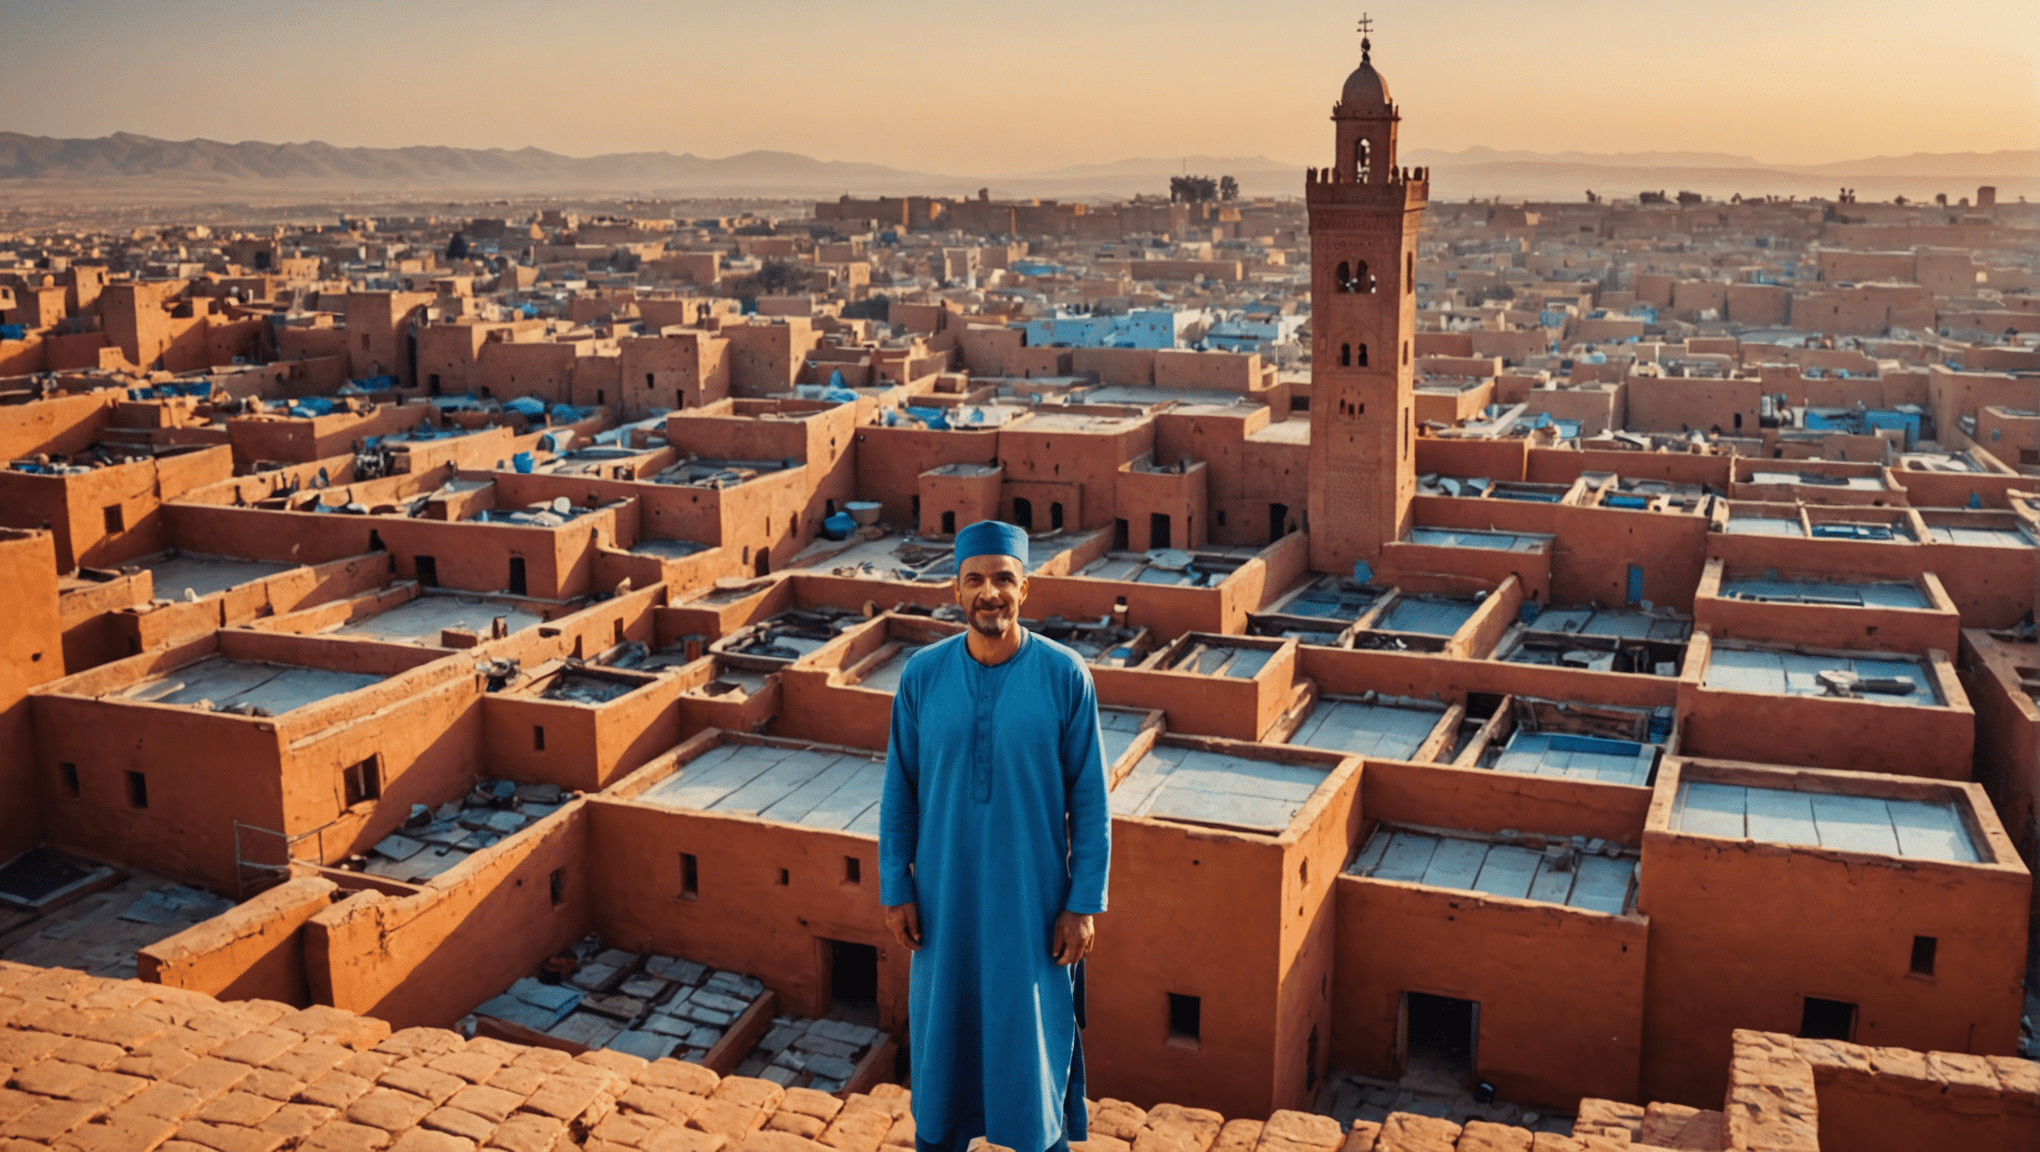 discover the favorite spots of celebrities in morocco's red city and experience its star appeal.